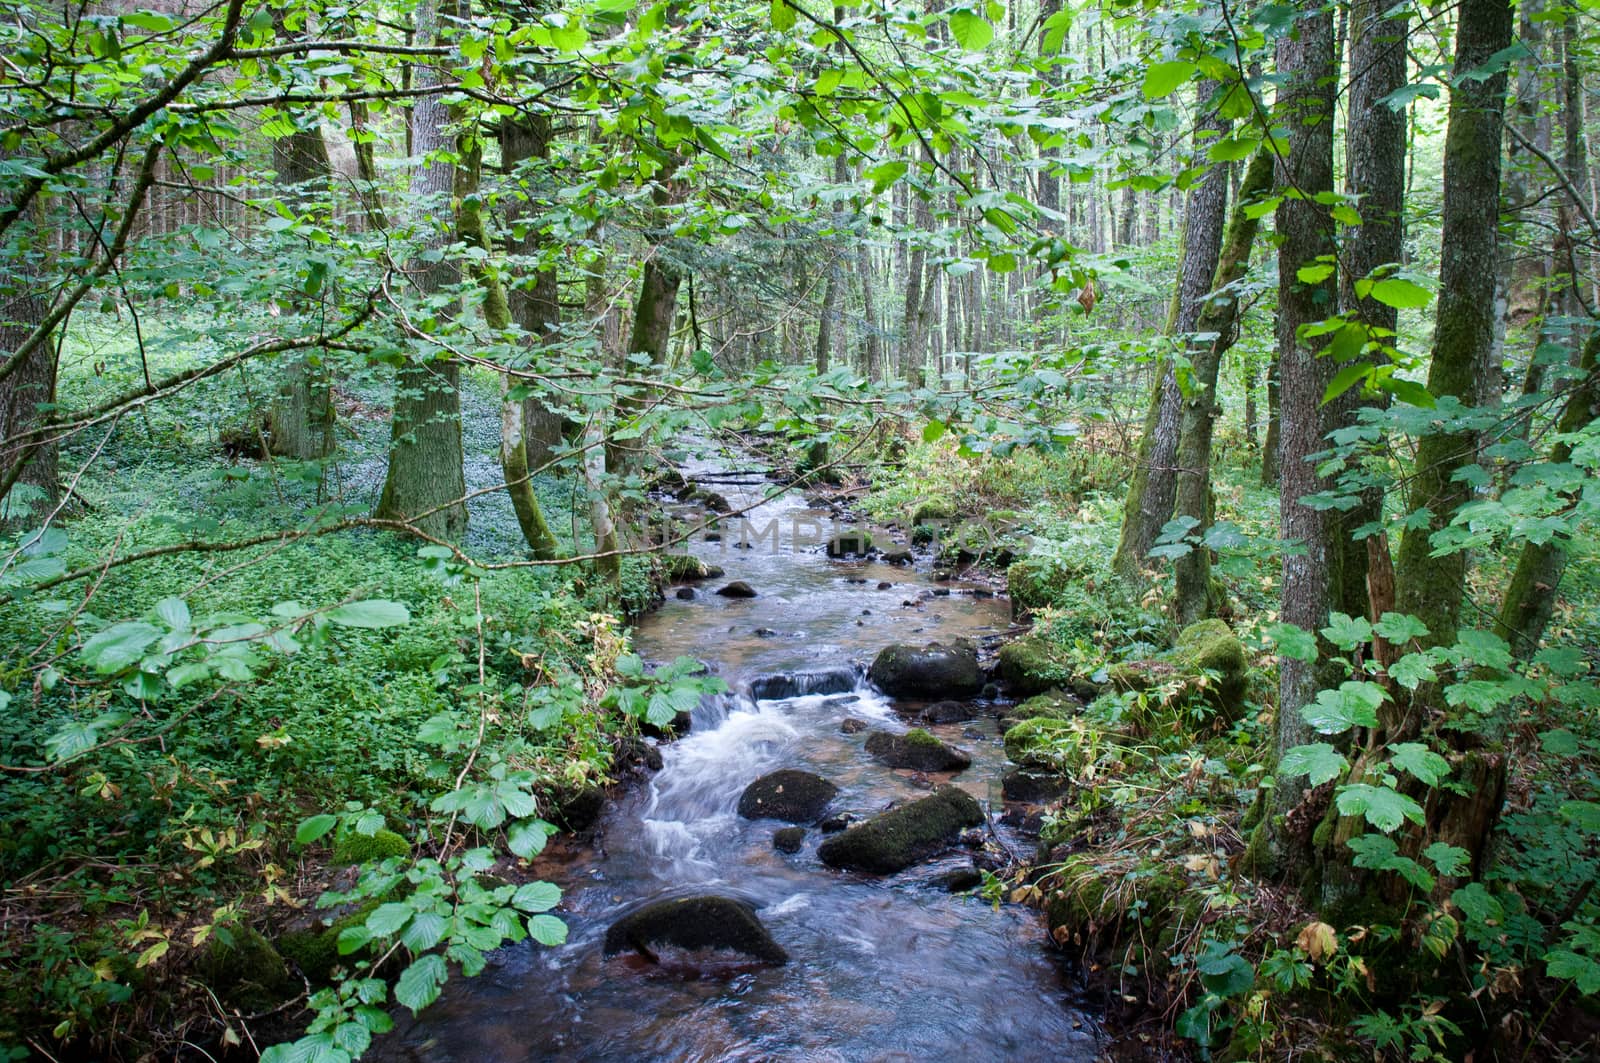 Stream in the coniferous forest in the Black Forest. Germany.